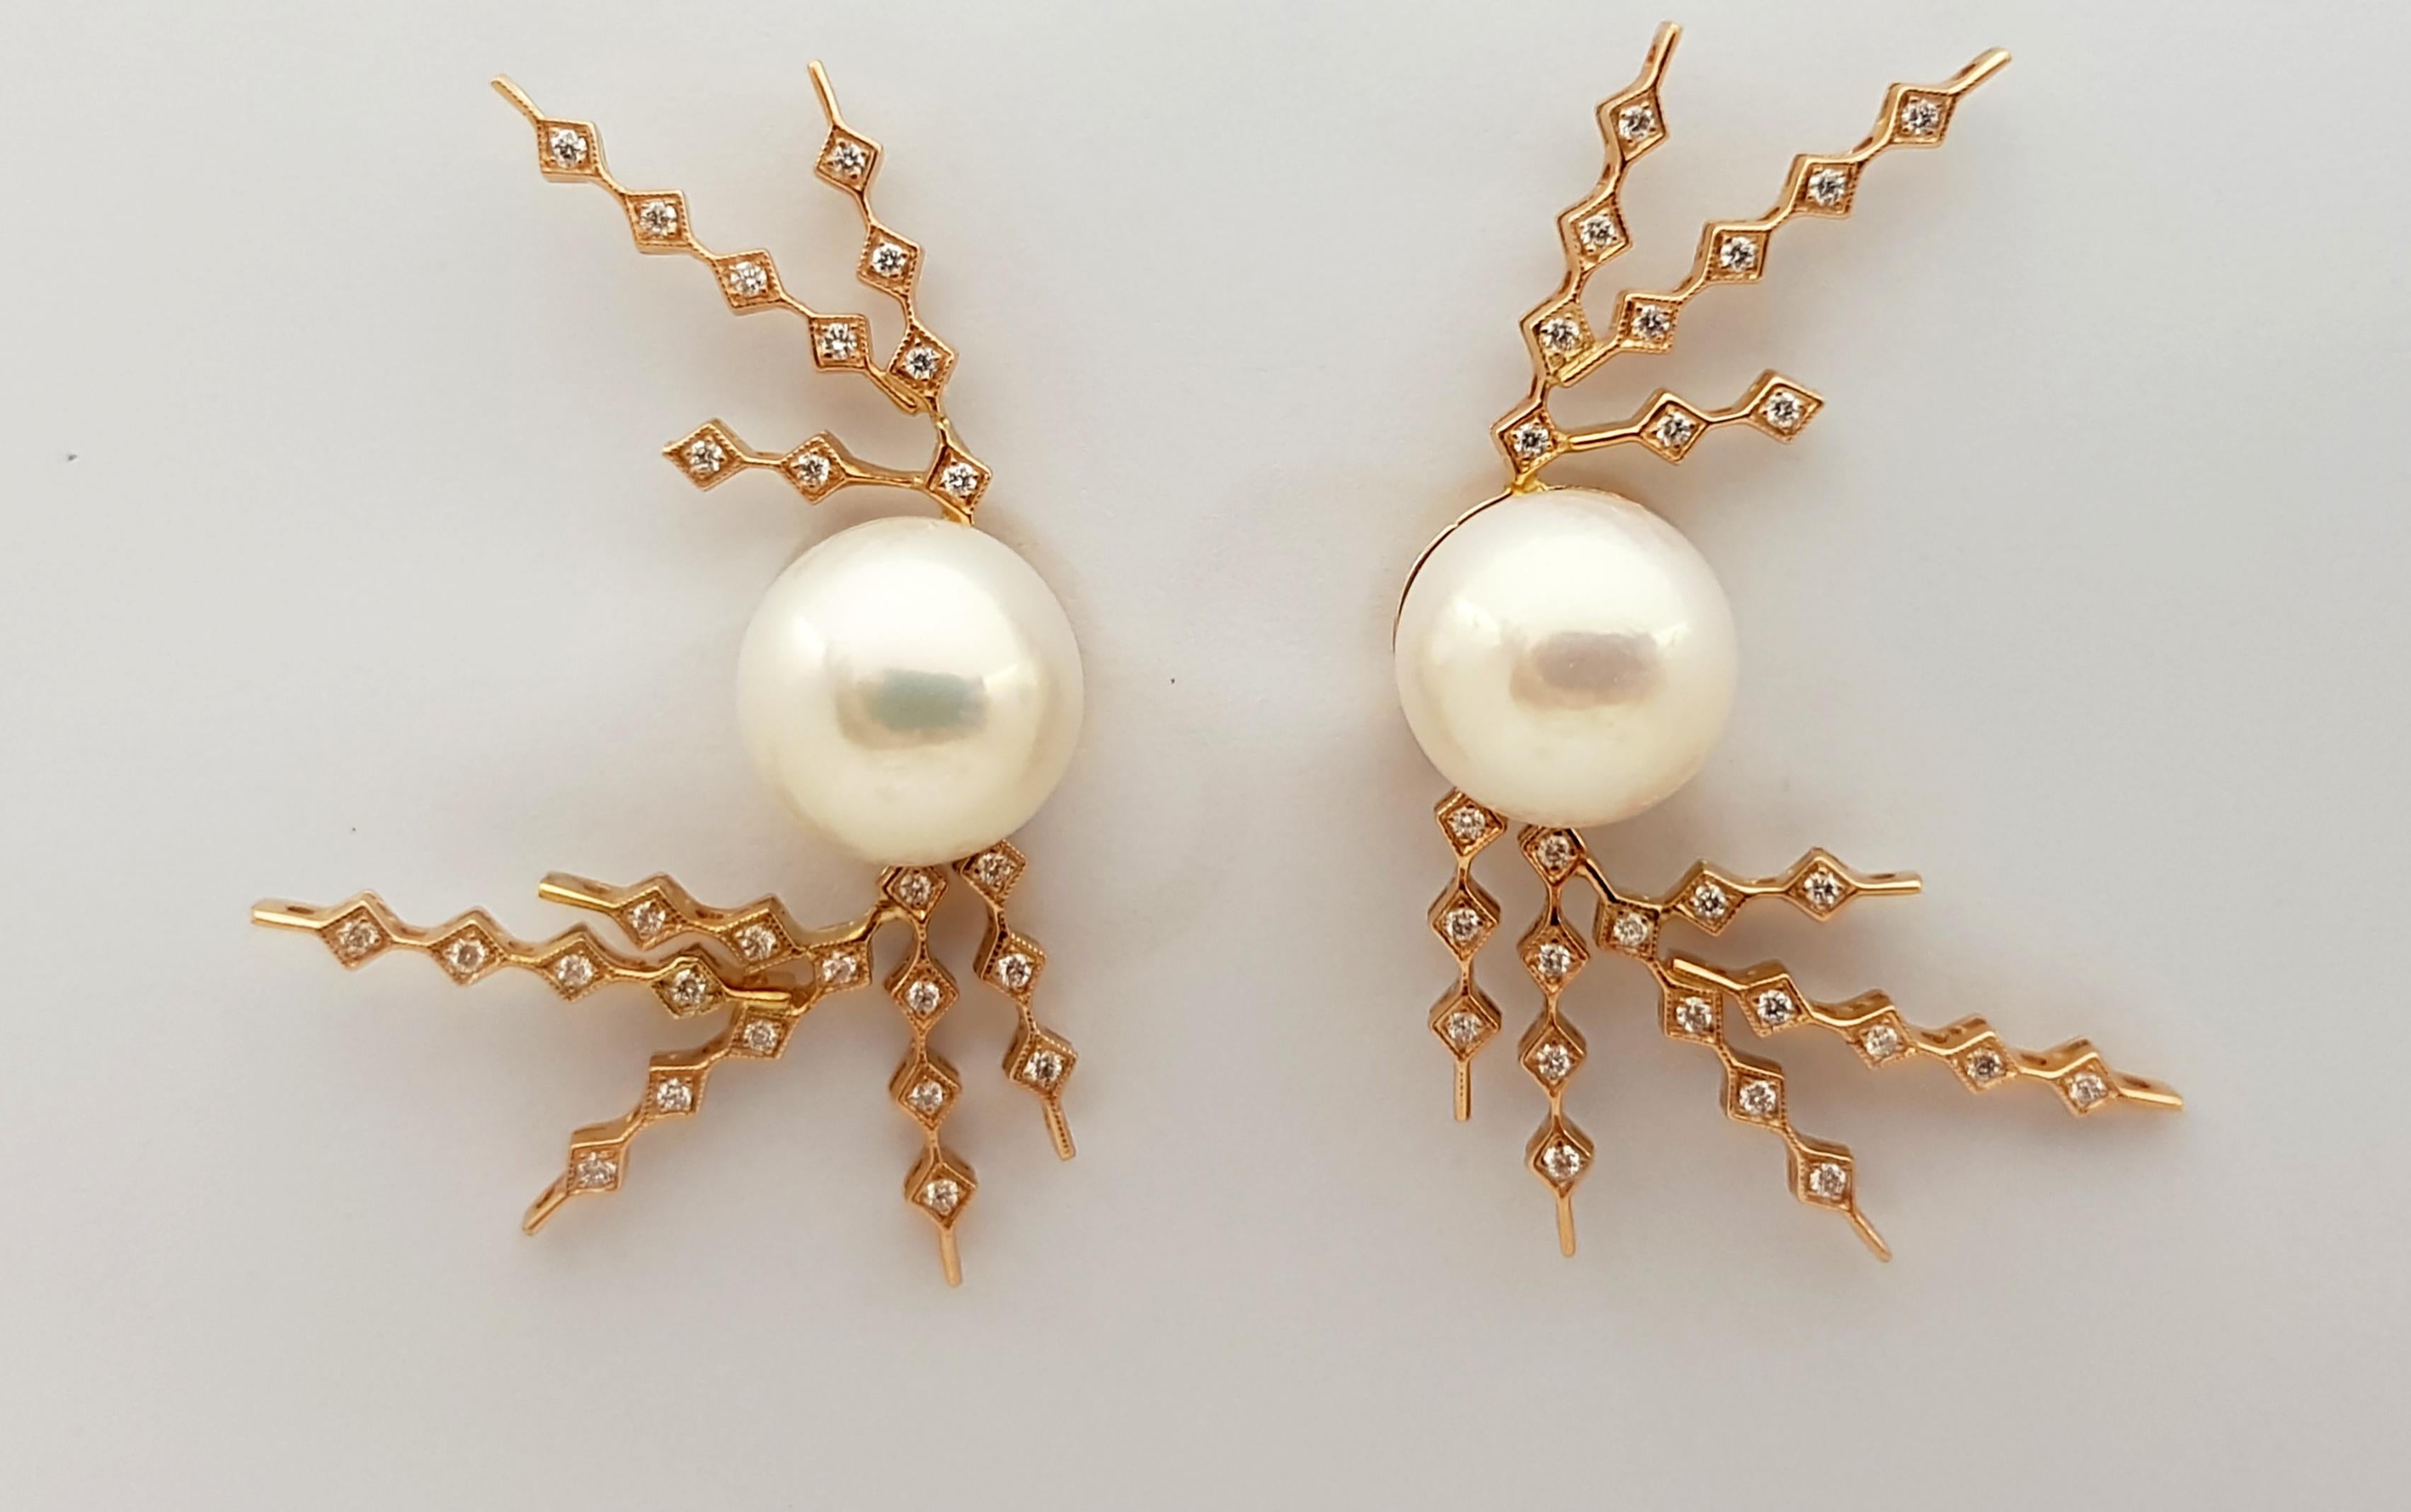 Pearl with Diamond 0.40 carat Earrings set in 18 Karat Rose Gold Settings

Width:  2.5 cm 
Length:  4.2 cm
Total Weight: 14.75 grams

Each talisman bears modern comfort and sensibility while embracing the beauty of ancient motifs, beliefs and